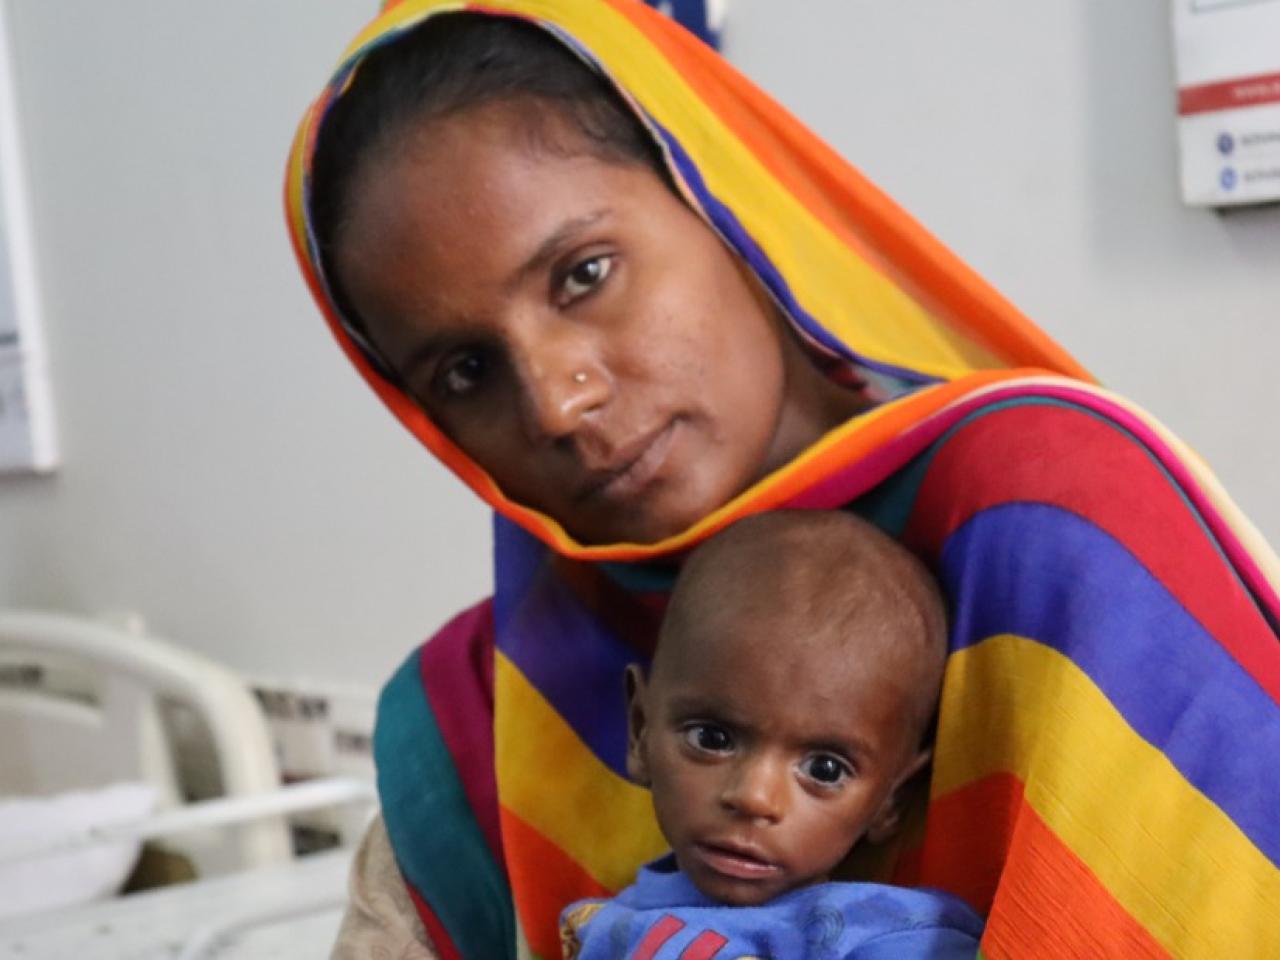 Many mothers, like Sobia in Pakistan, bring their children to health centers to receive lifesaving care.